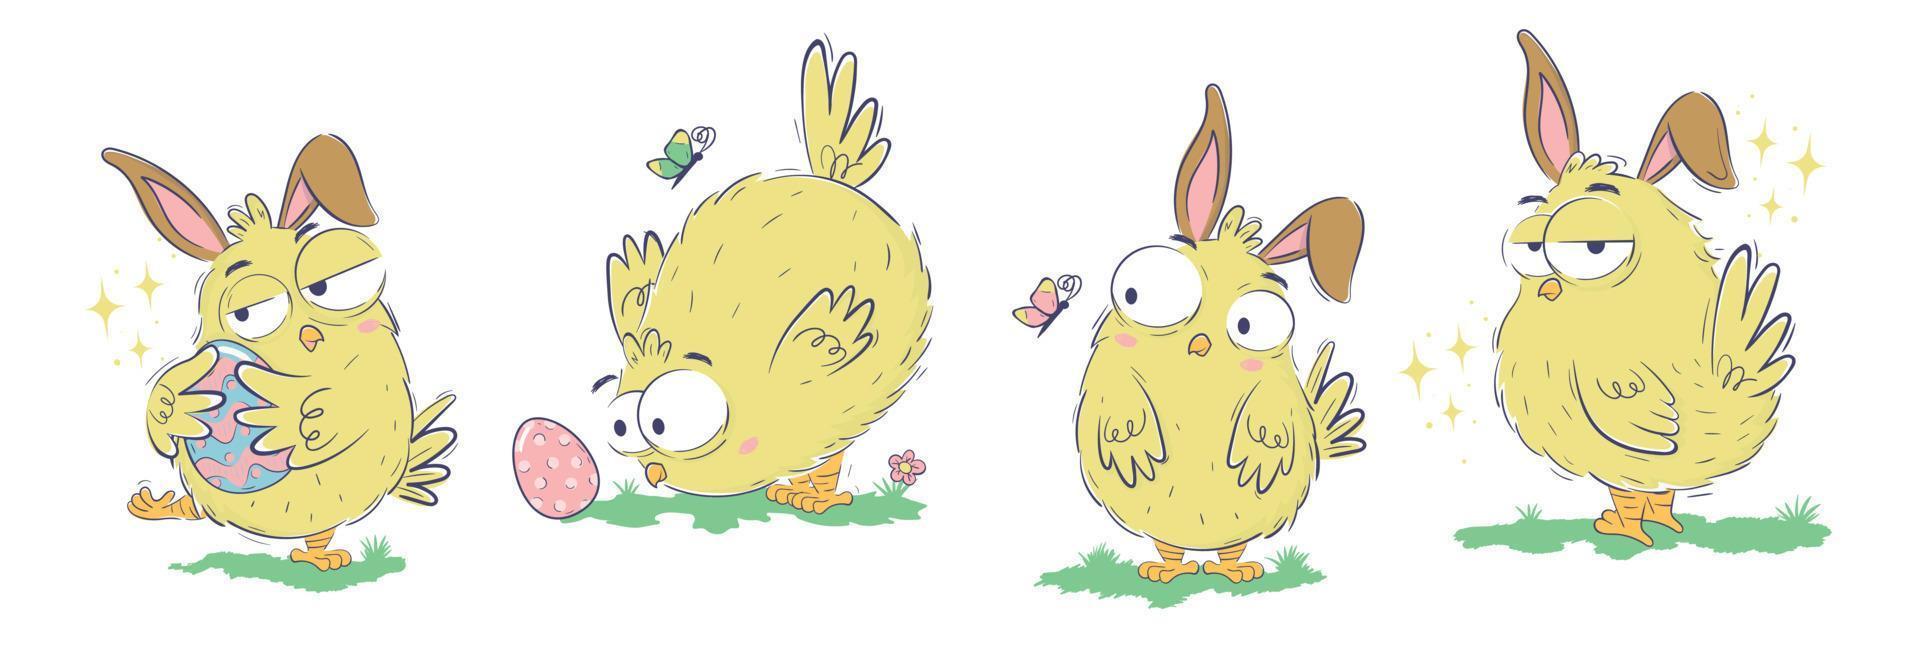 Clipart collection of funny chicks with easter eggs and bunny ears in doodle sketch style. Hand drawn horizontal banner with funny domestic birds vector